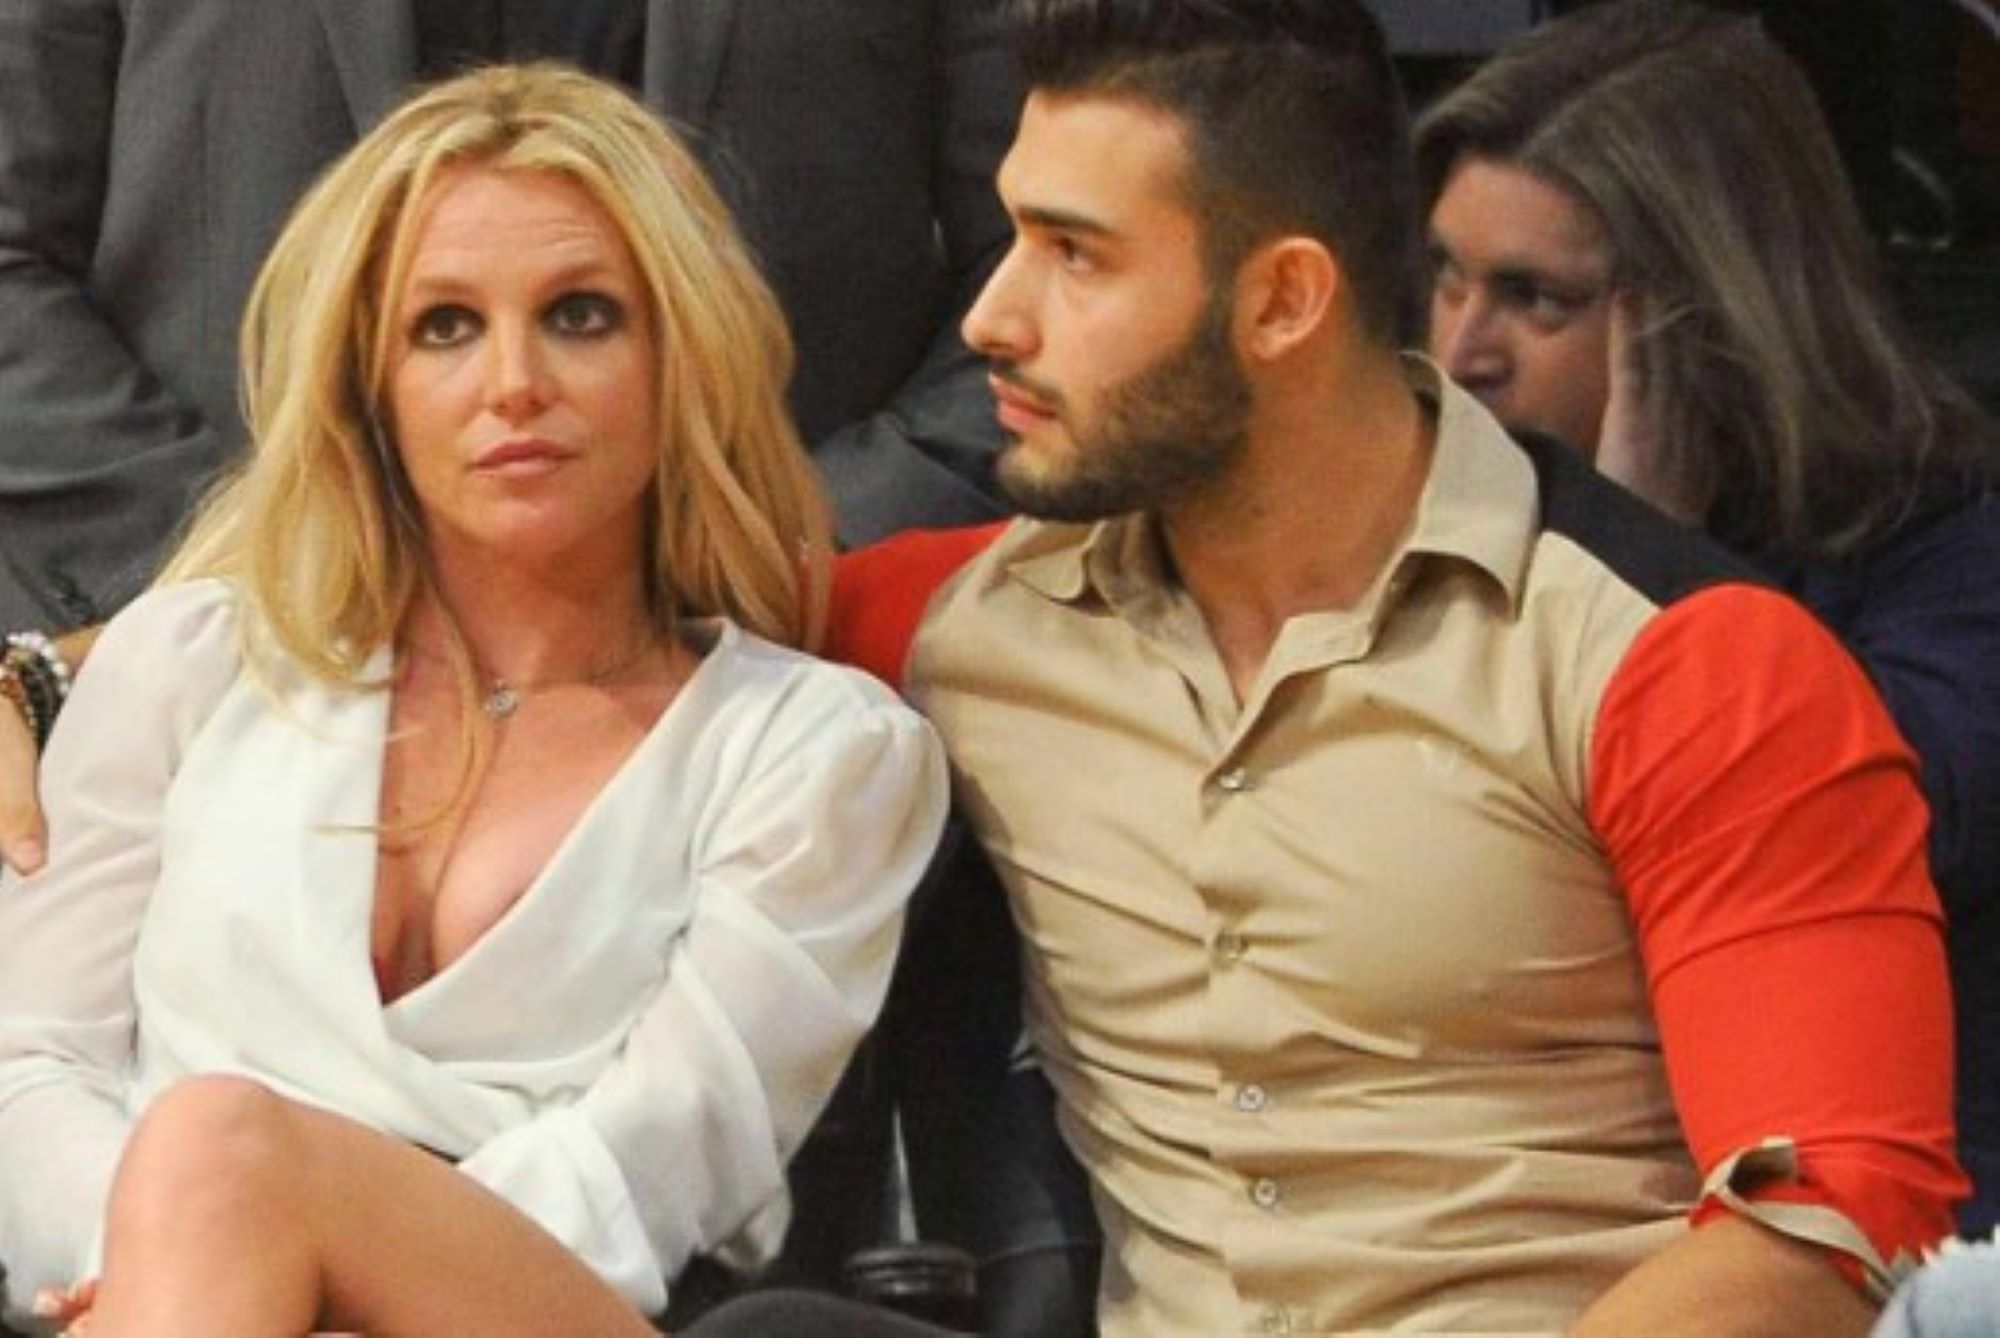 Britney Spears and Sam Asghari supposedly split up